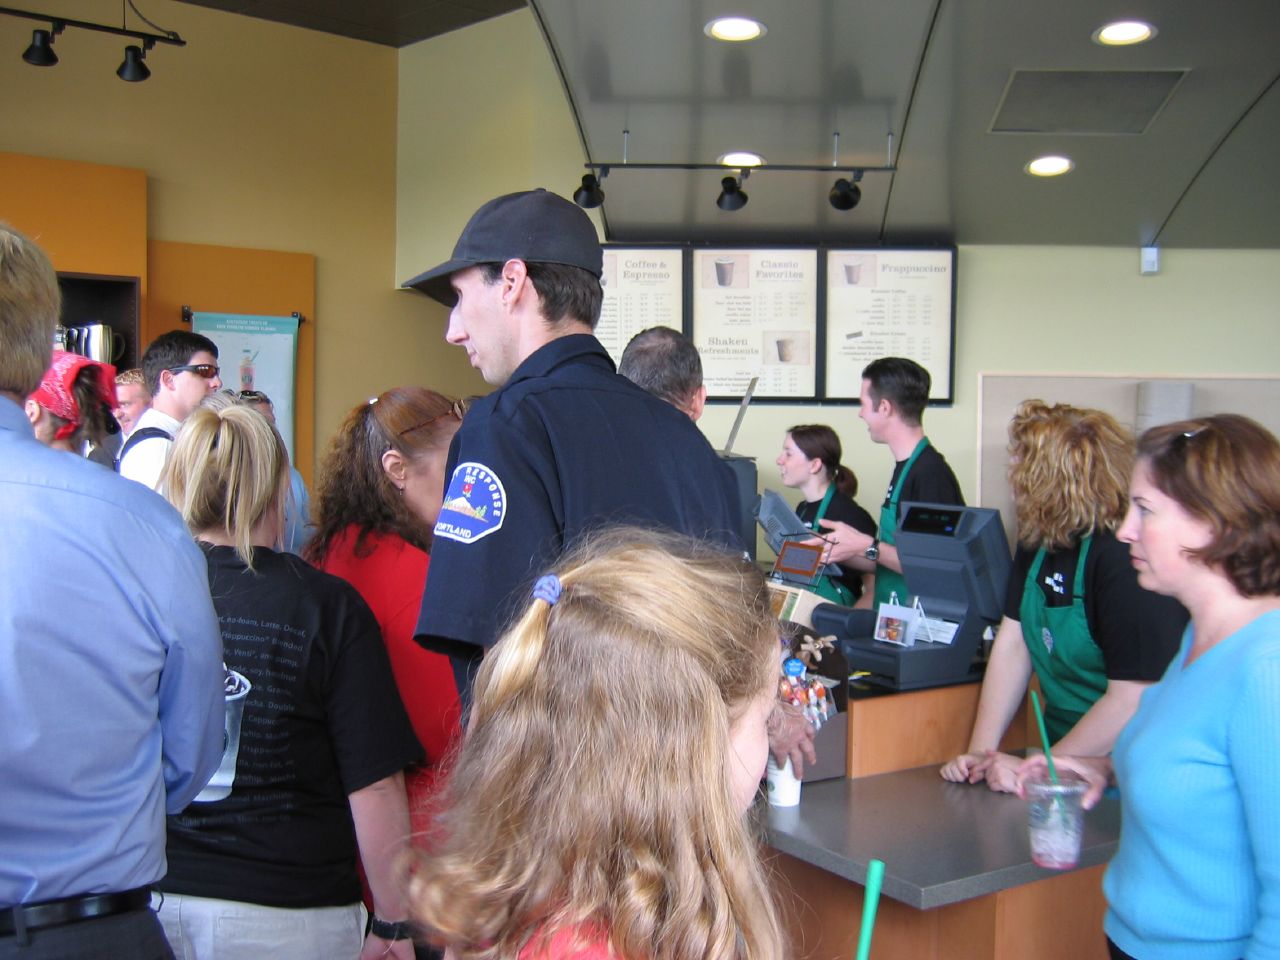 Security guard for Starbucks opening